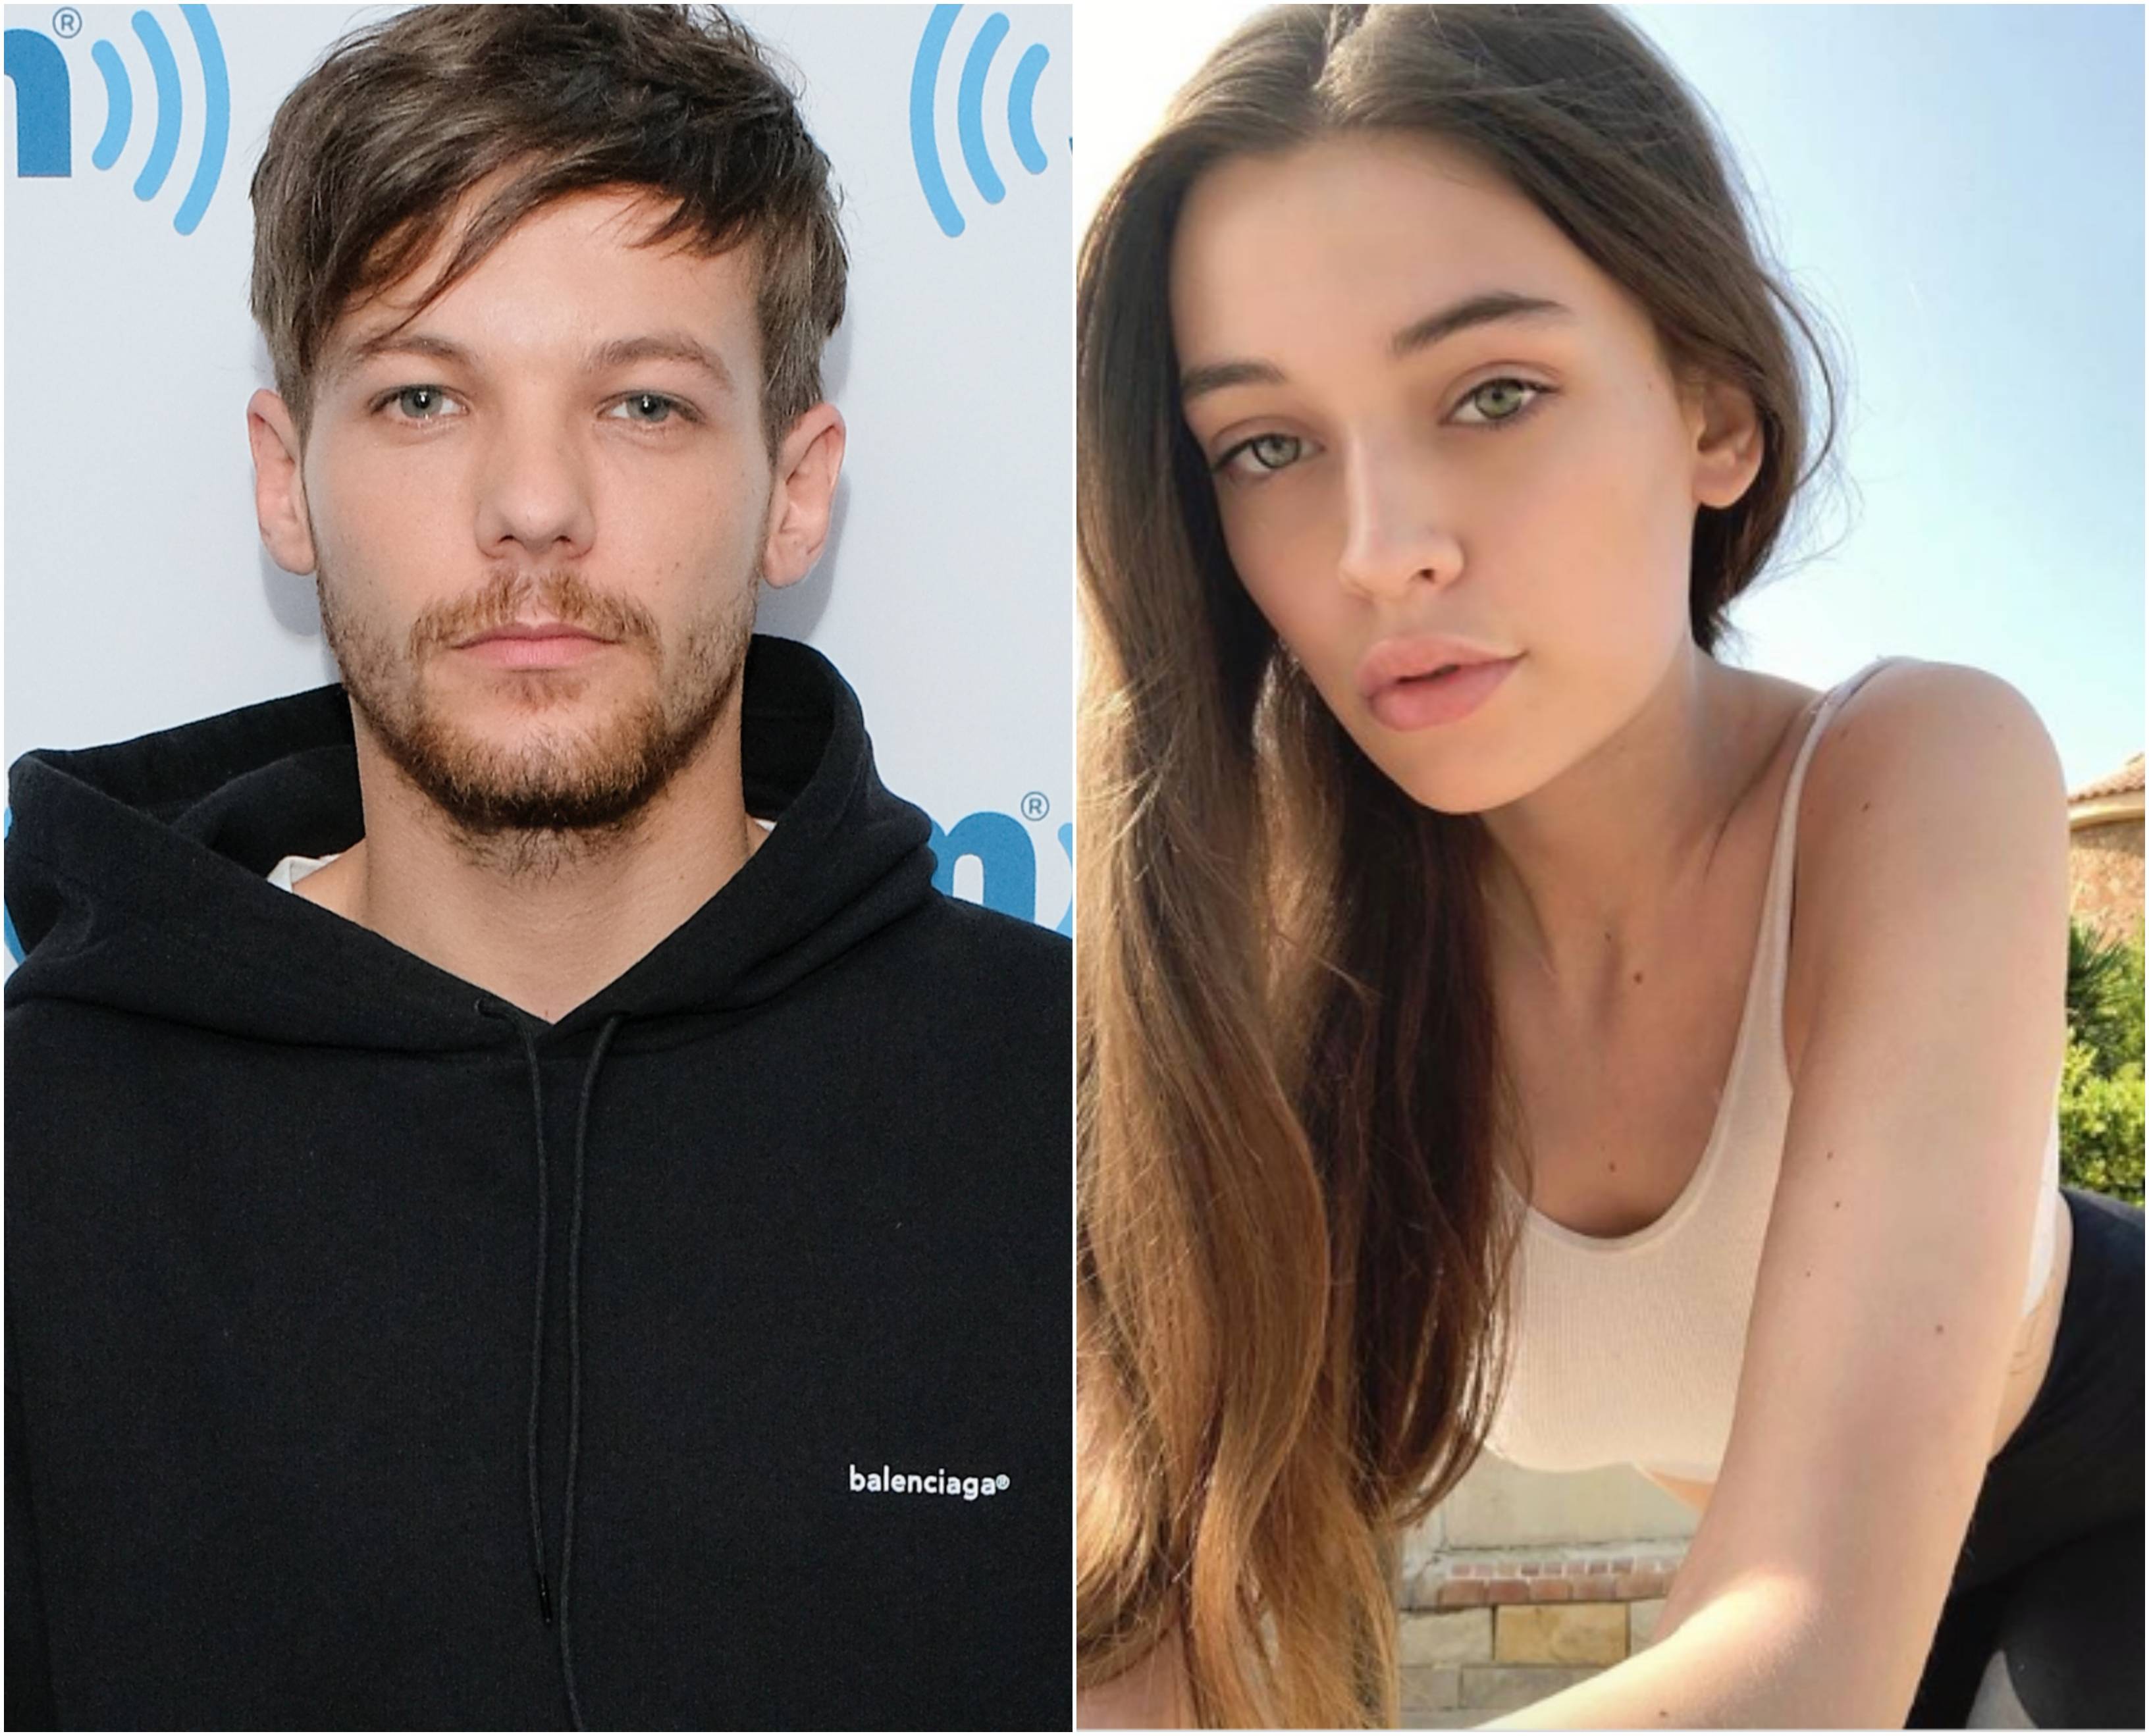 Louis Tomlinson Height, Weight, Age, Girlfriend, Family, Facts, Biography